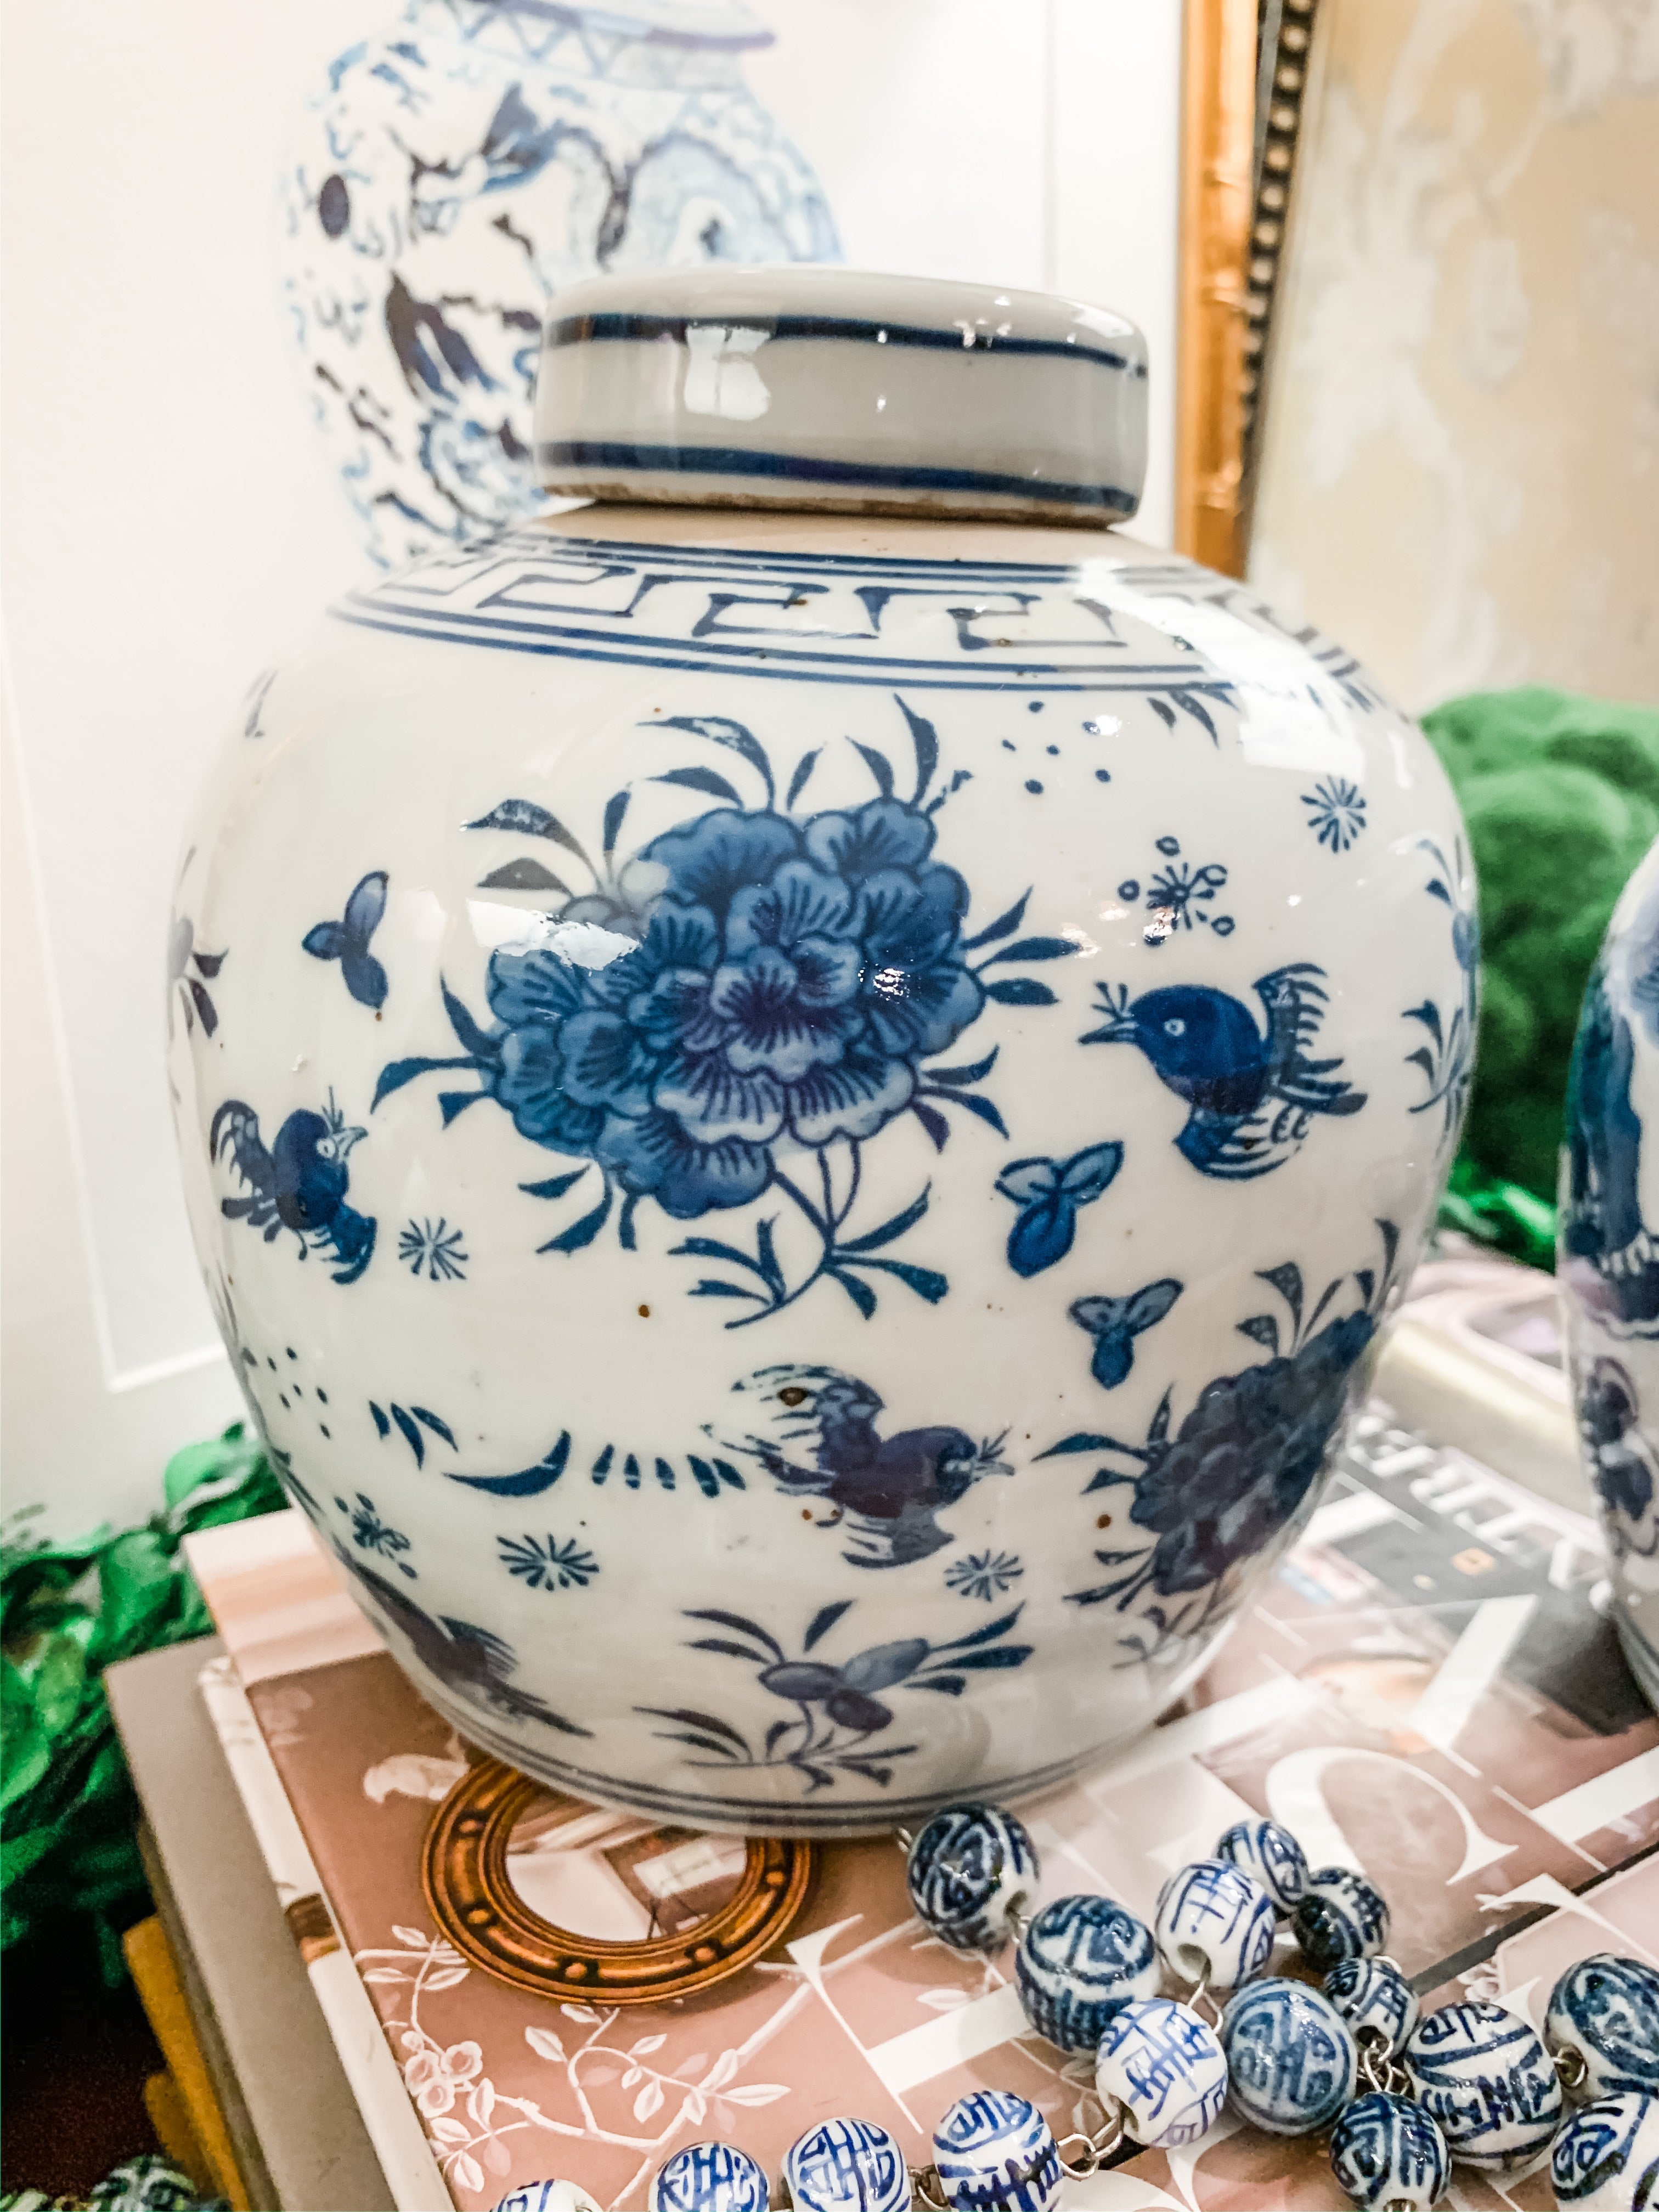 Shop Collectible Brooks for a wide selection of classic blue and white ginger jars, perfect for adding a touch of chinoiserie to your home decor!  This beautiful hand painted jar is made in the antique style and features a bird and flower design.  It stands 6.5" tall.  